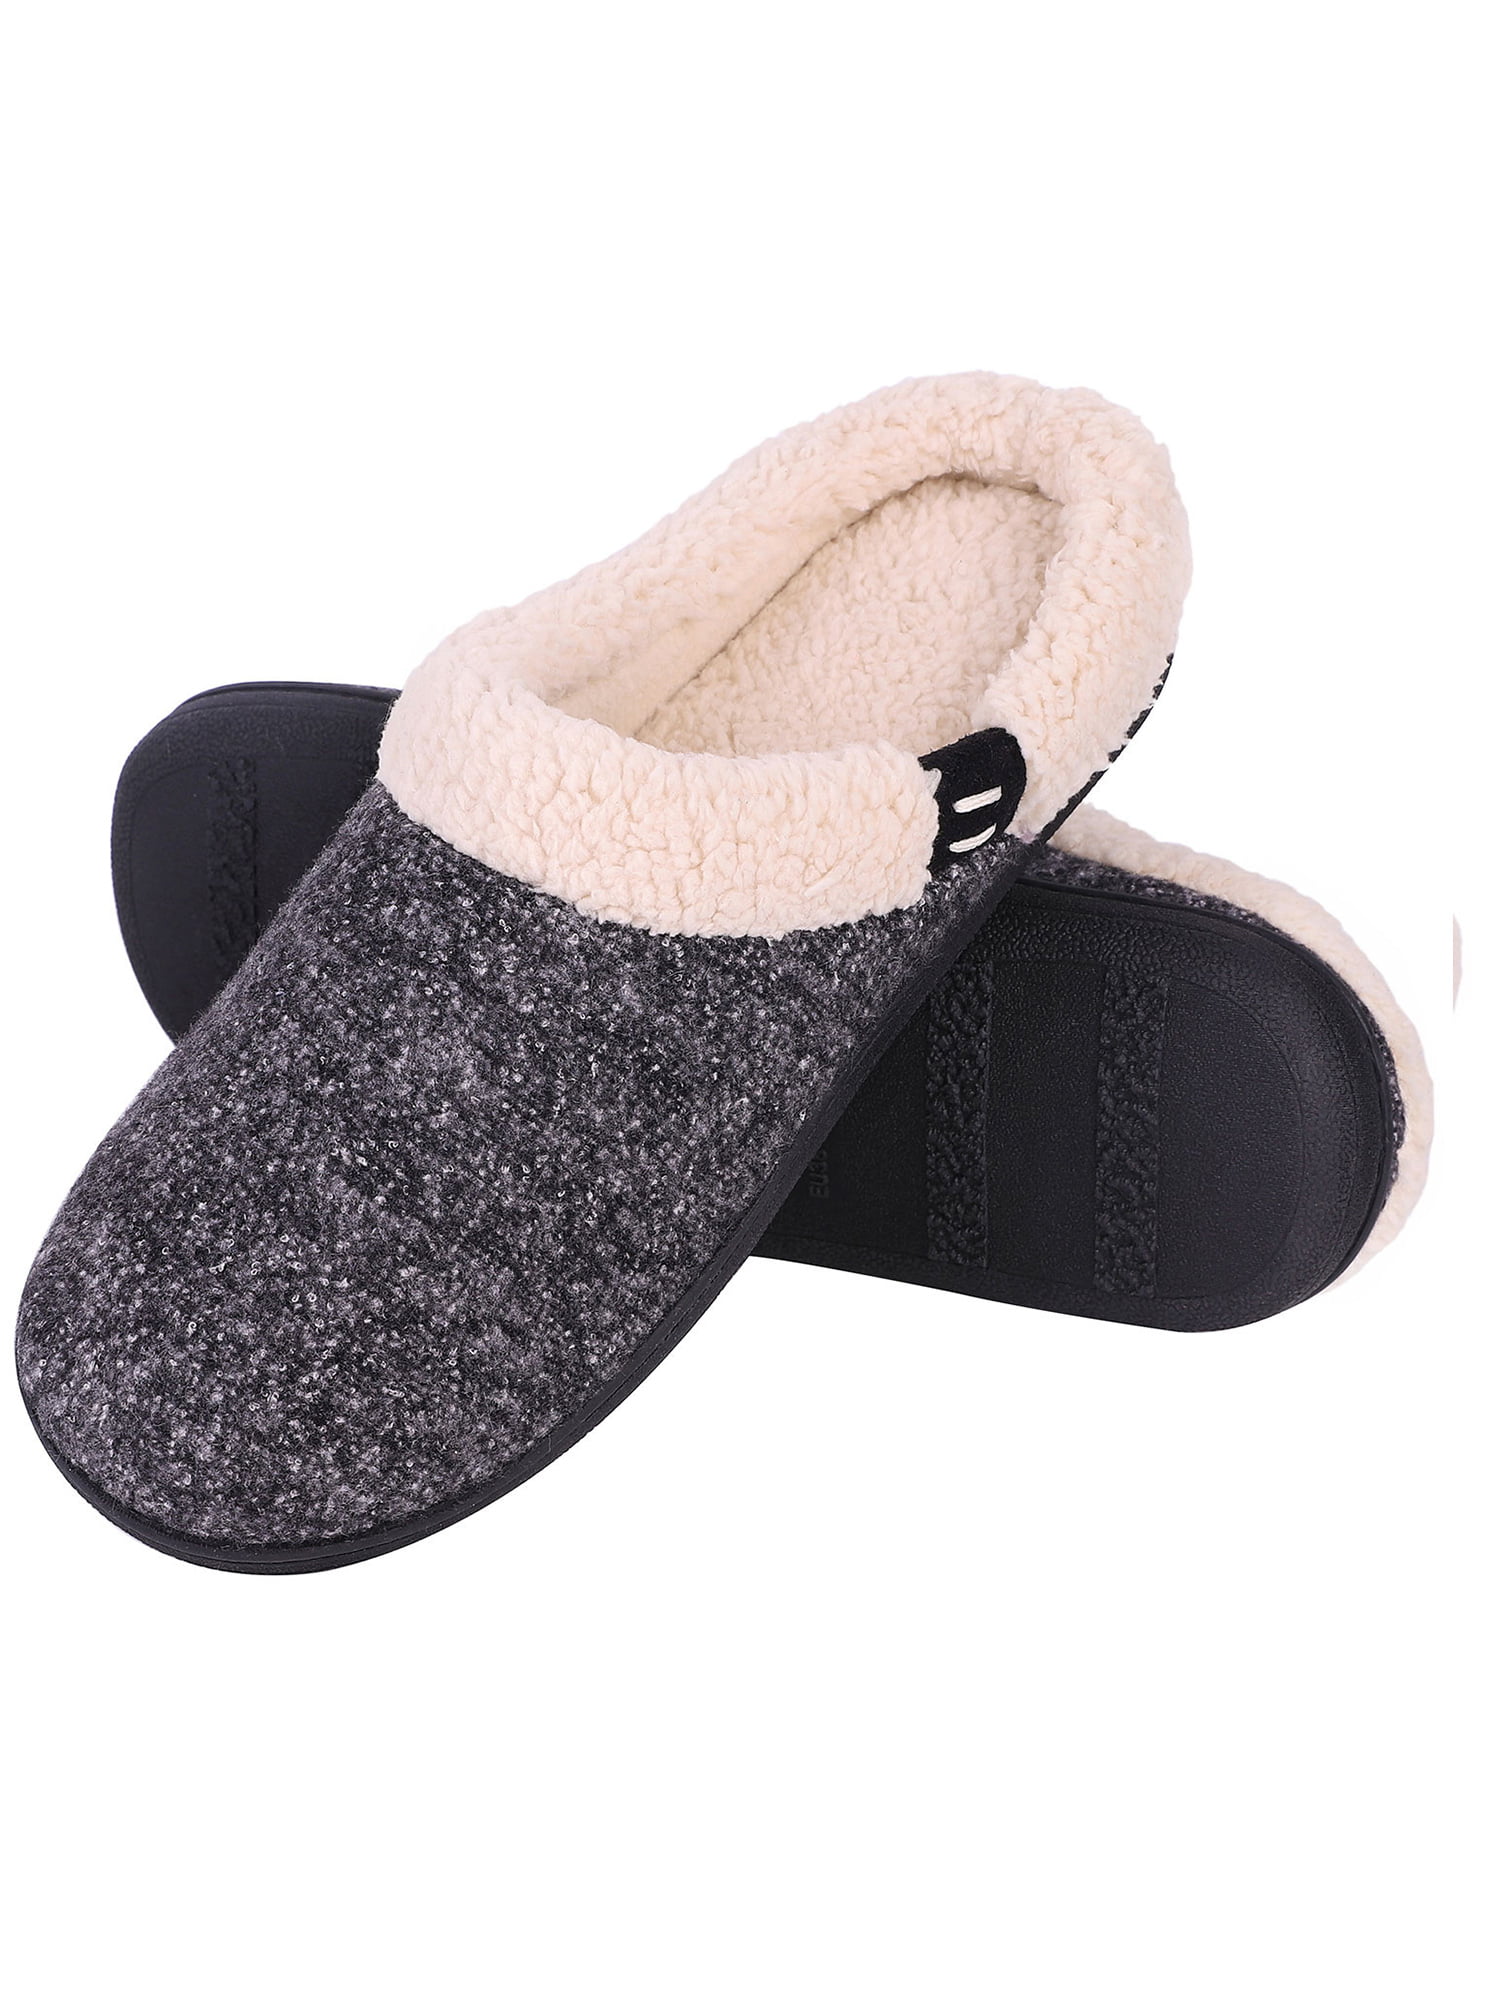 NOBLE - Women's Indoor Warm Slippers Soft Fur Lined Slippers Memory ...